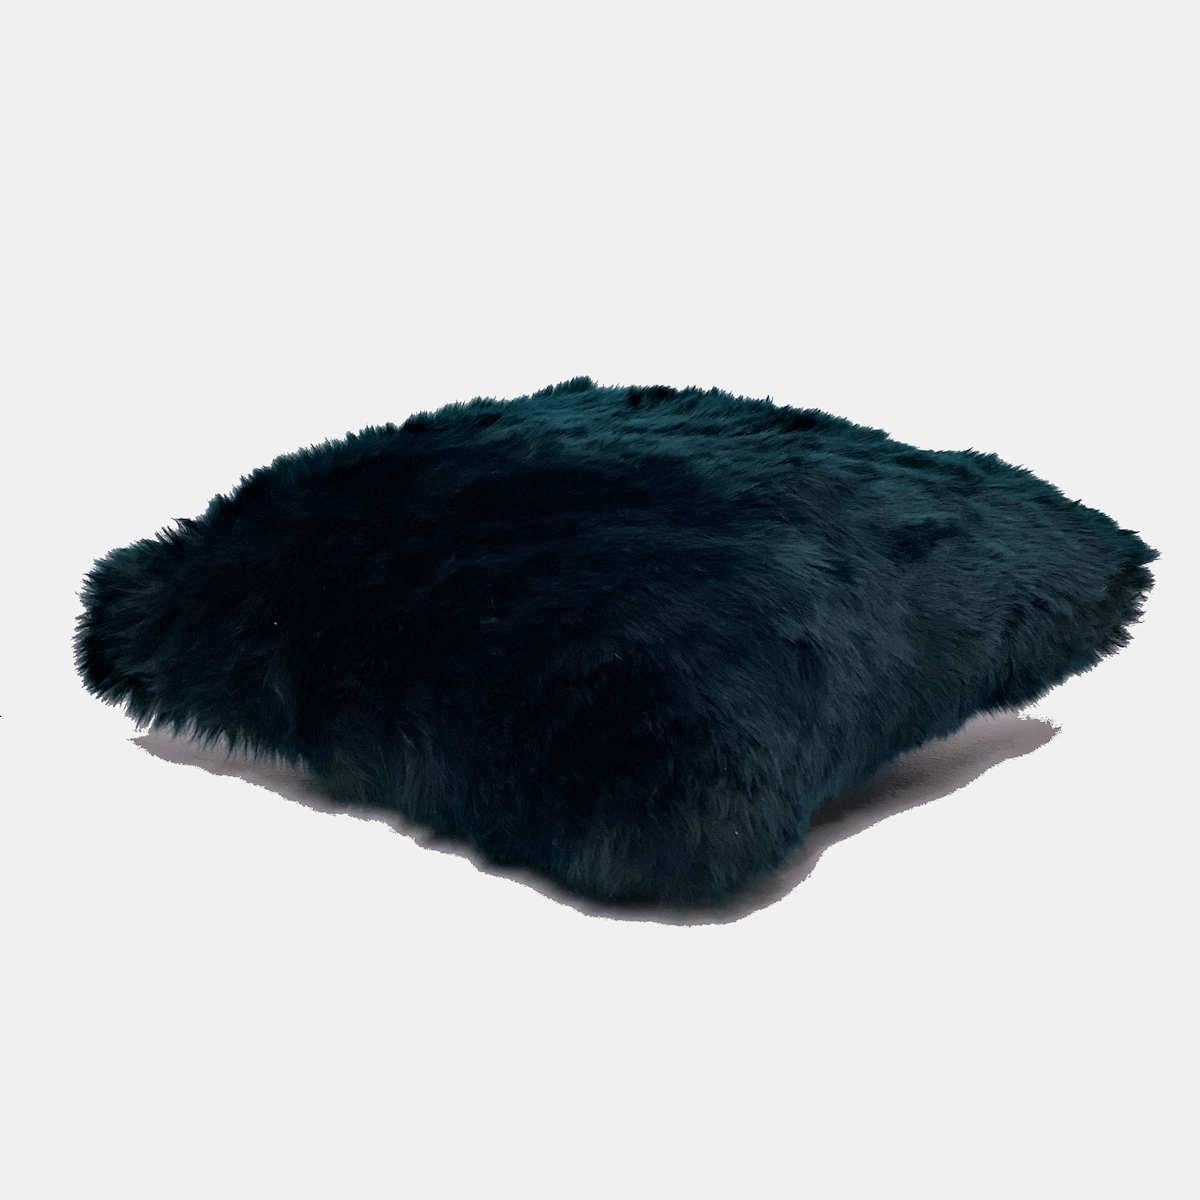 Introduce rich and irresistible tactile elements to your decor with this sumptuous teal fur pillow. Featuring a pure wool pile with superior silky softness, this collection of fluffy pillows is hand-crafted from beautiful high-quality New Zealand